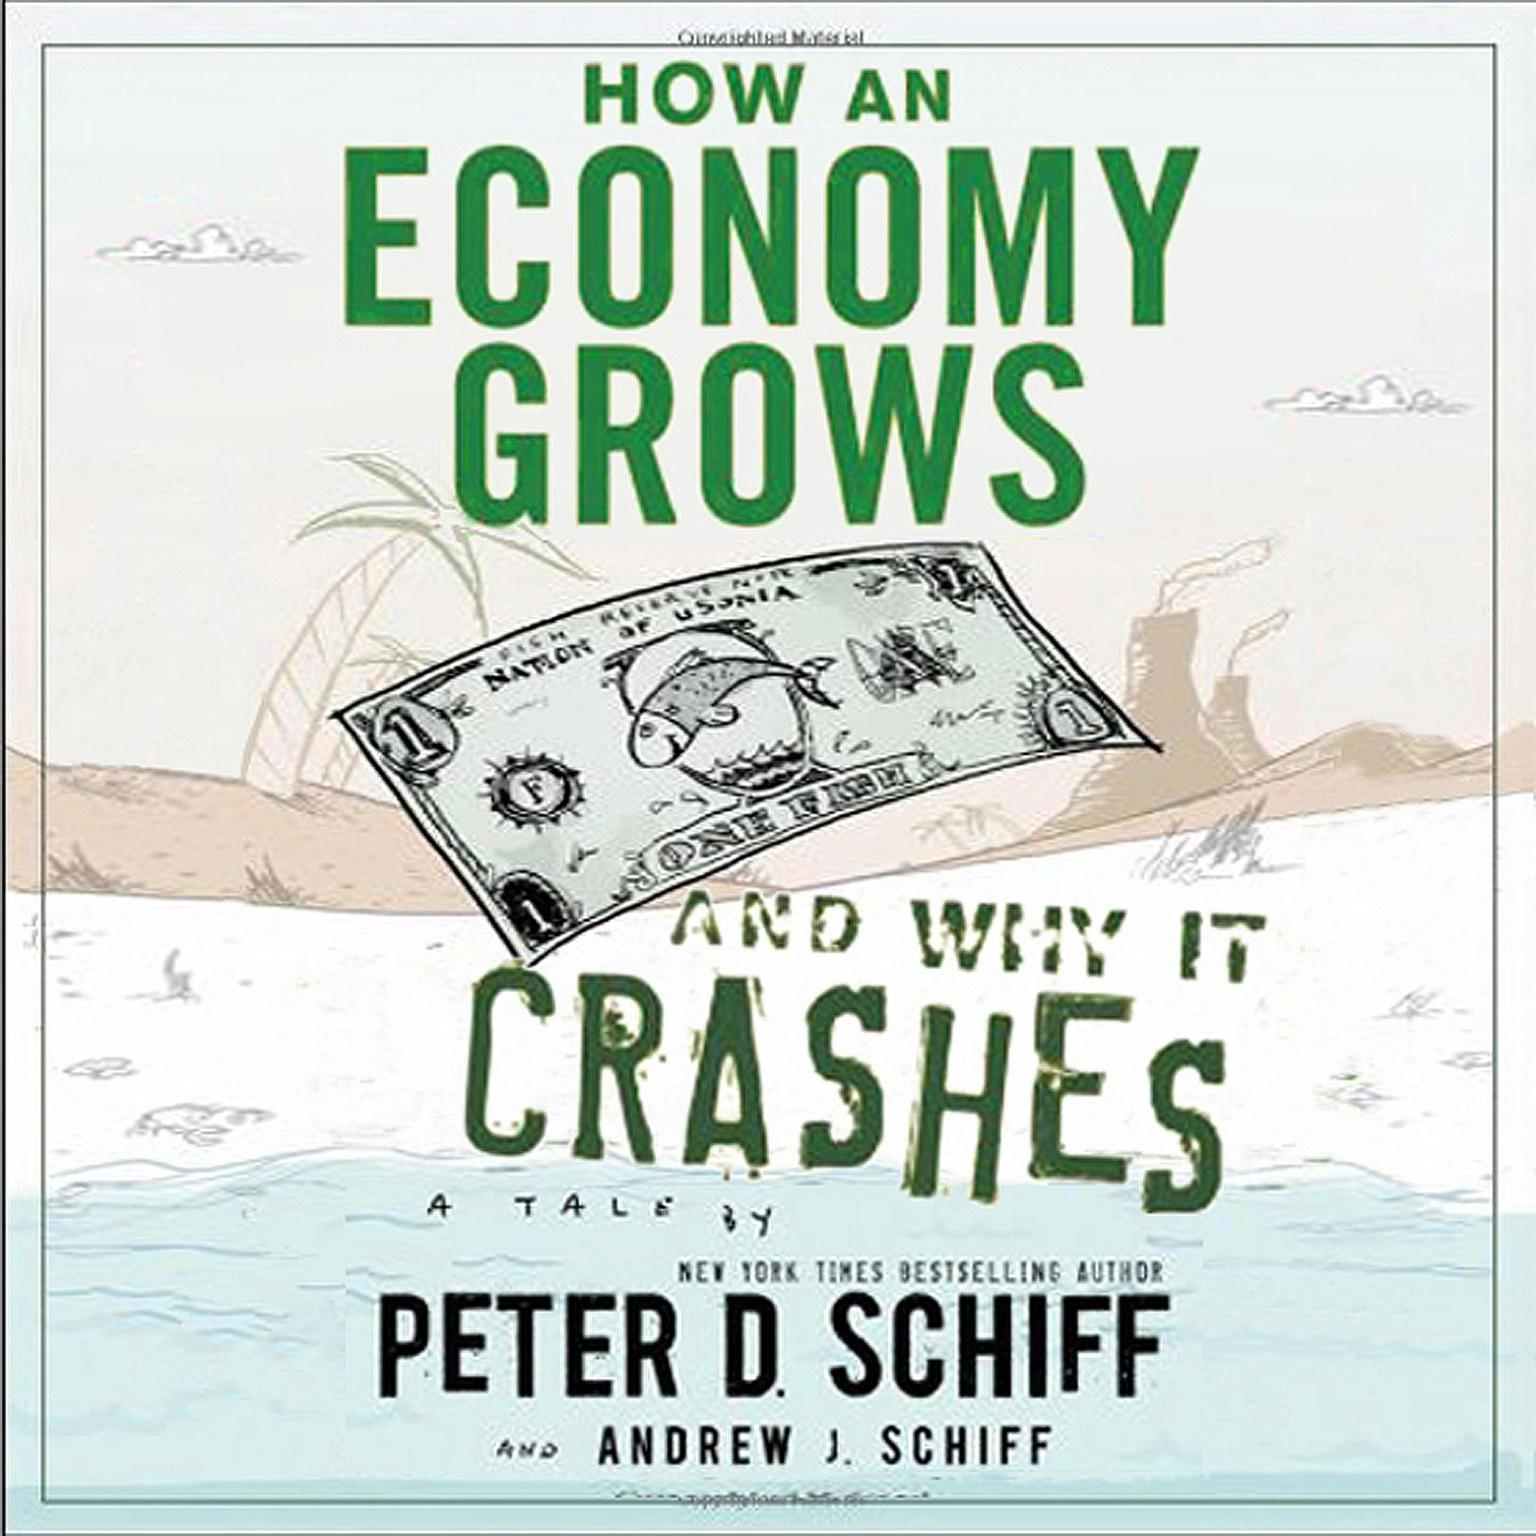 How an Economy Grows and Why It Crashes Audiobook, by Peter D. Schiff